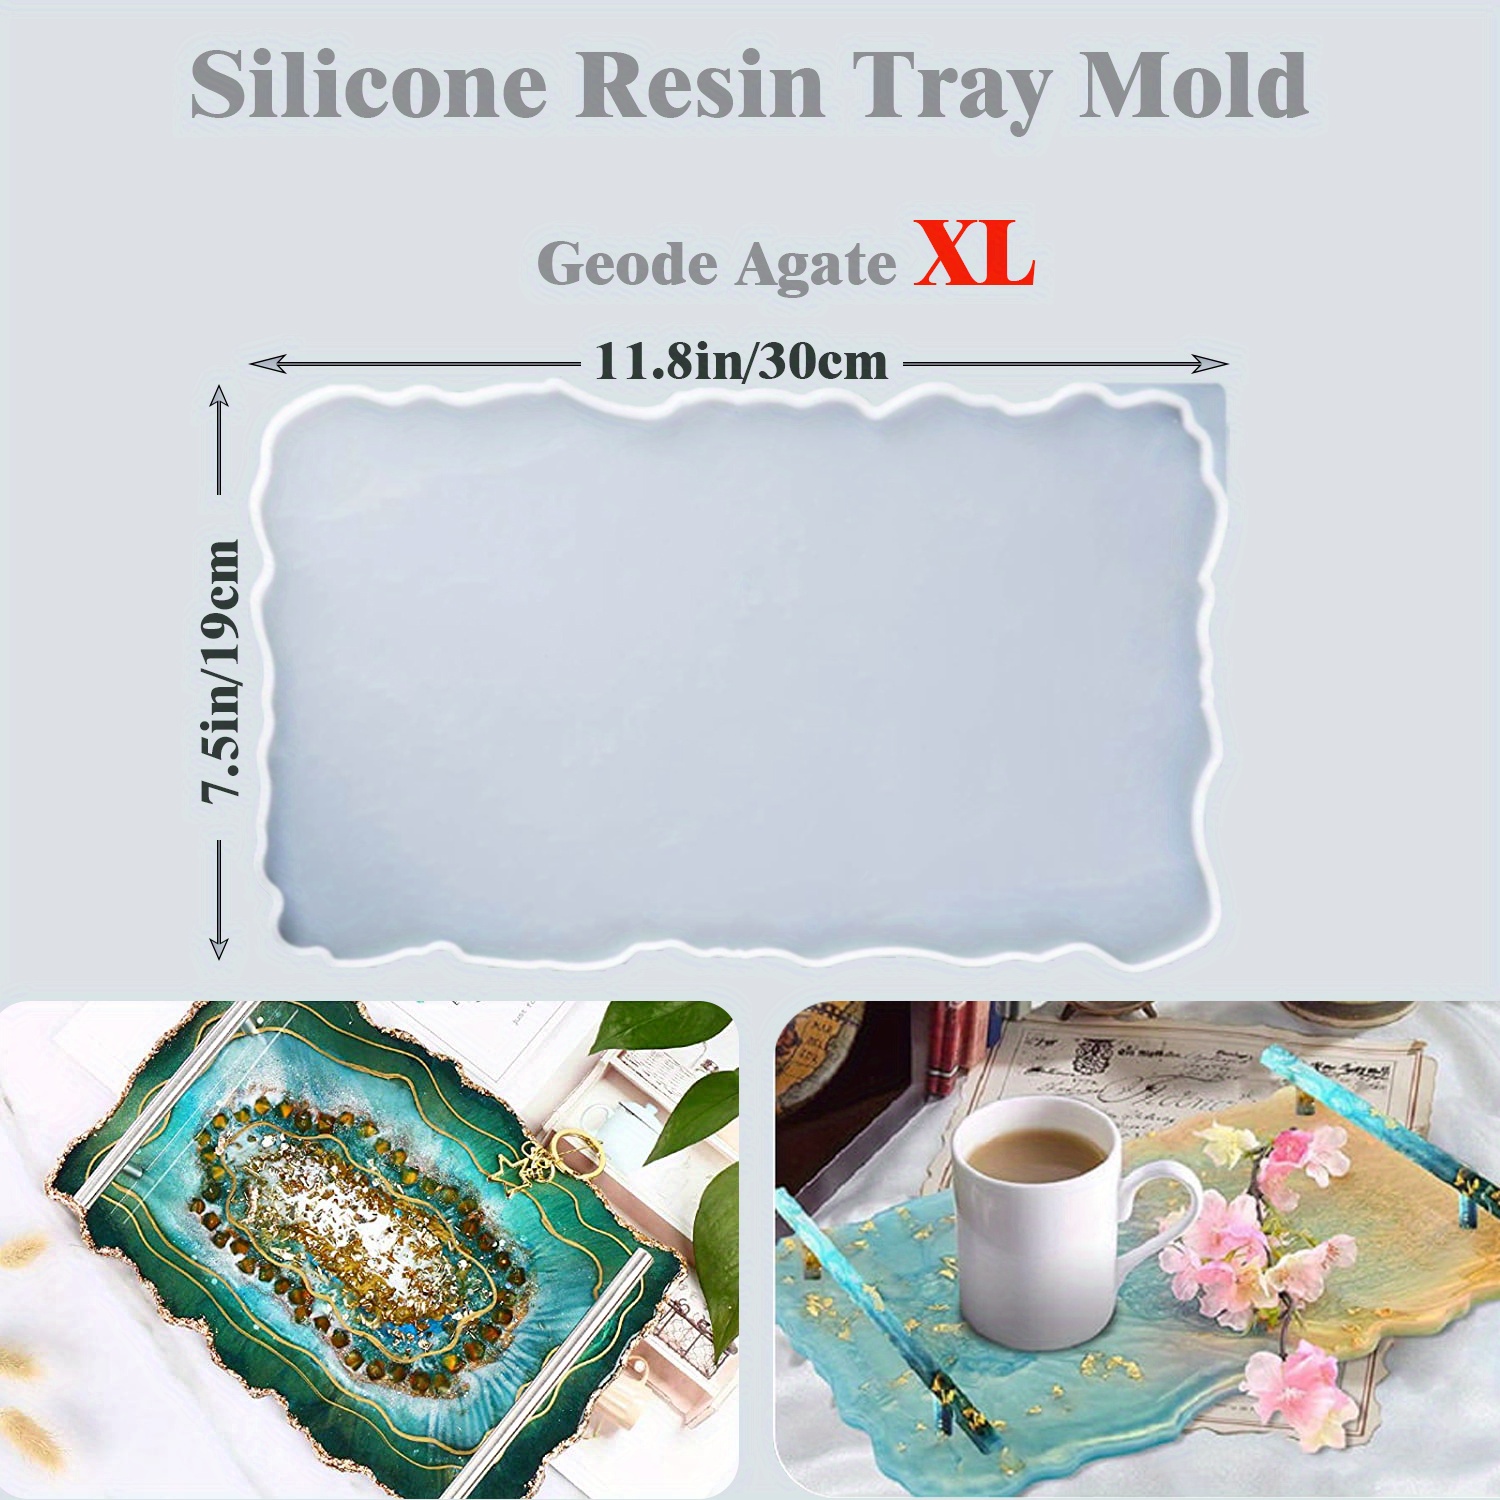 Epoxy Resin Tray Mold Silicone Agate Geode Coaster Molds for Casting Making  DIY